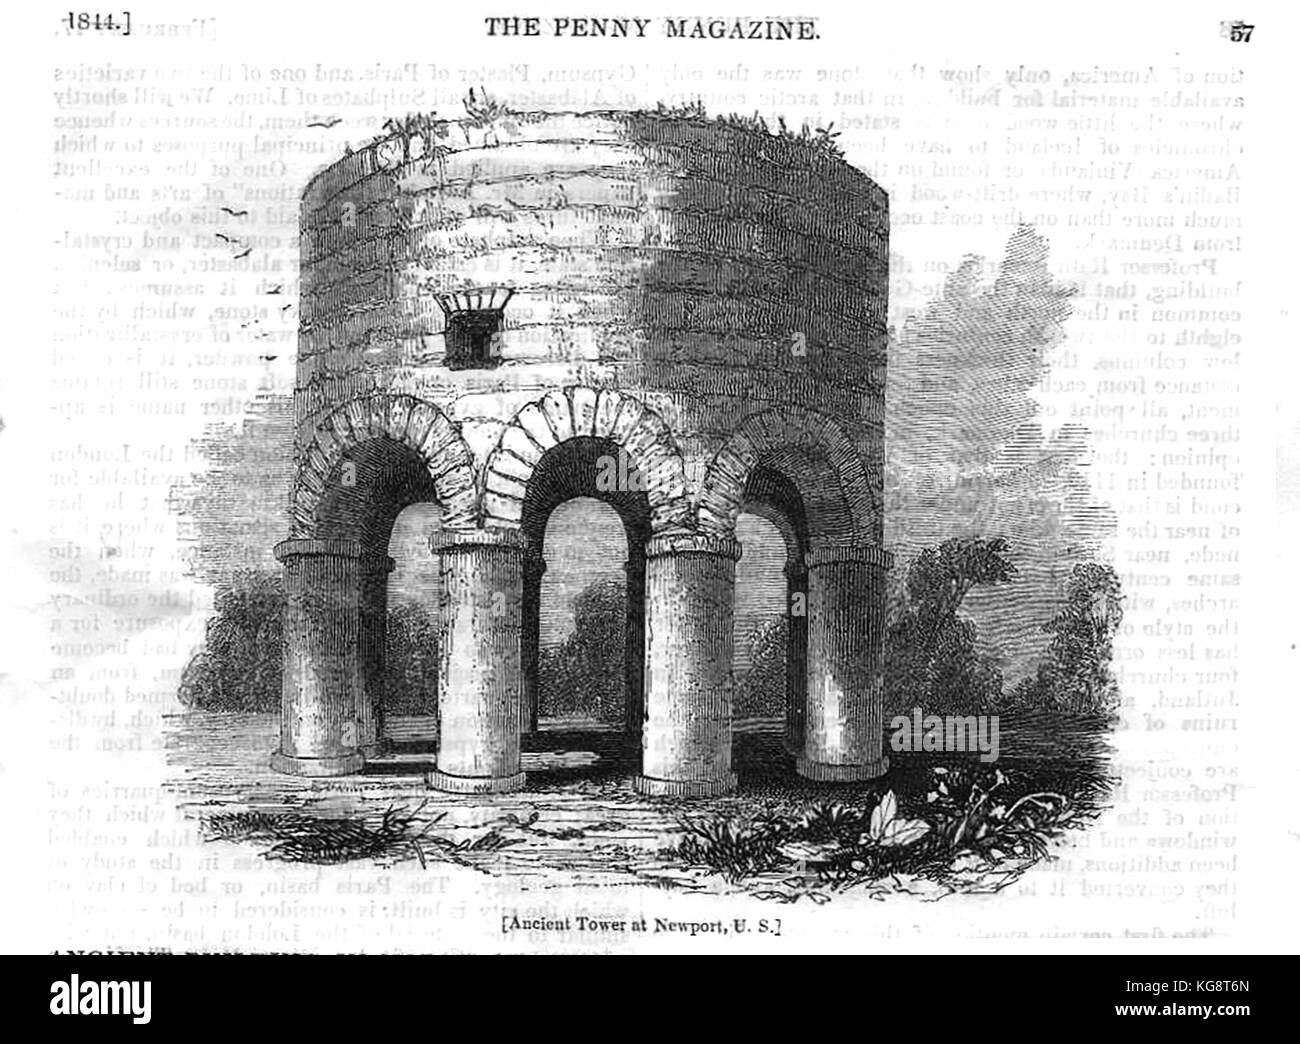 KNIGHTS TEMPLARS - An article from the  'Penny Magazine' 1844 showing an ancient windmill-like base structure at Newport  Rhode Island USA which some believe to have been constructed by Knights Templars Stock Photo